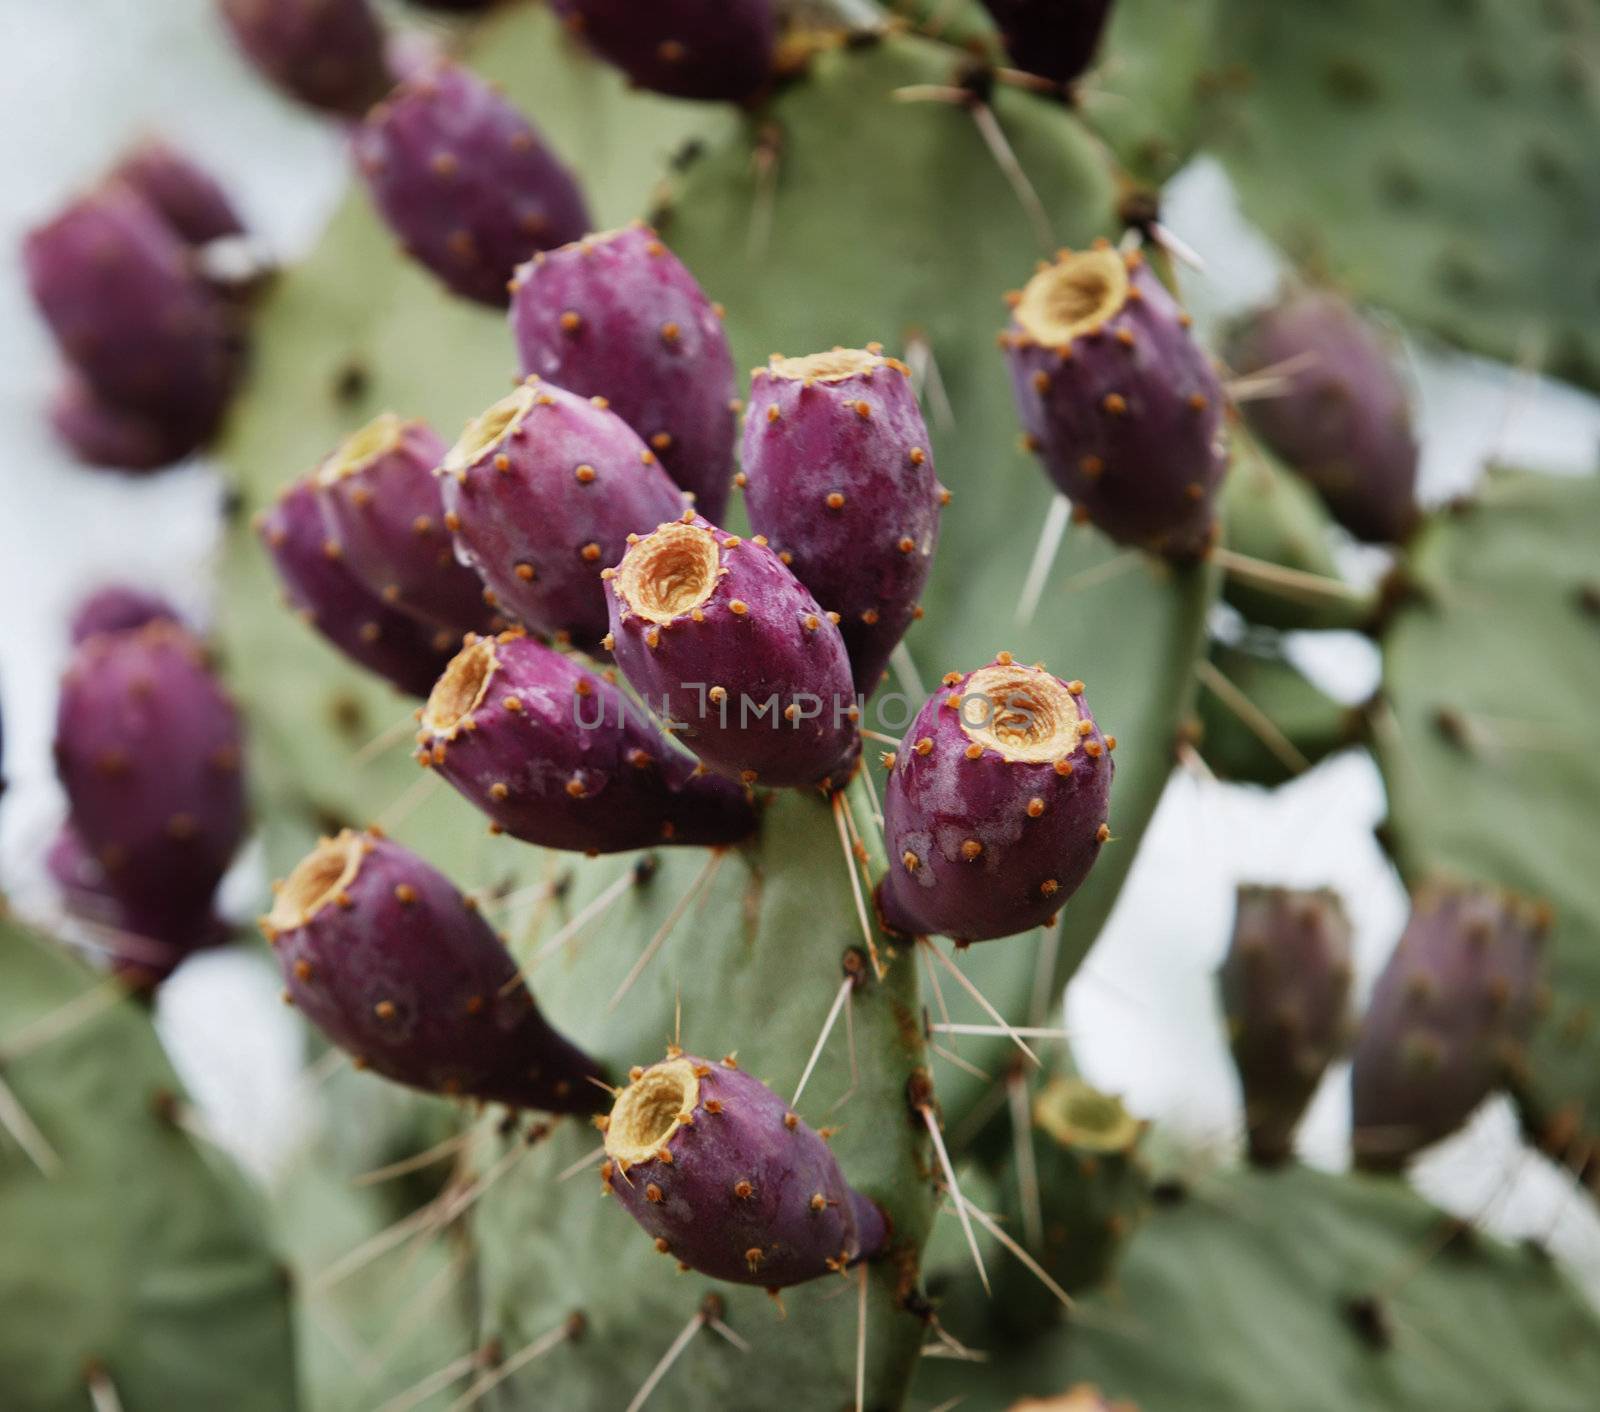 Prickly Pear Fruit by Creatista